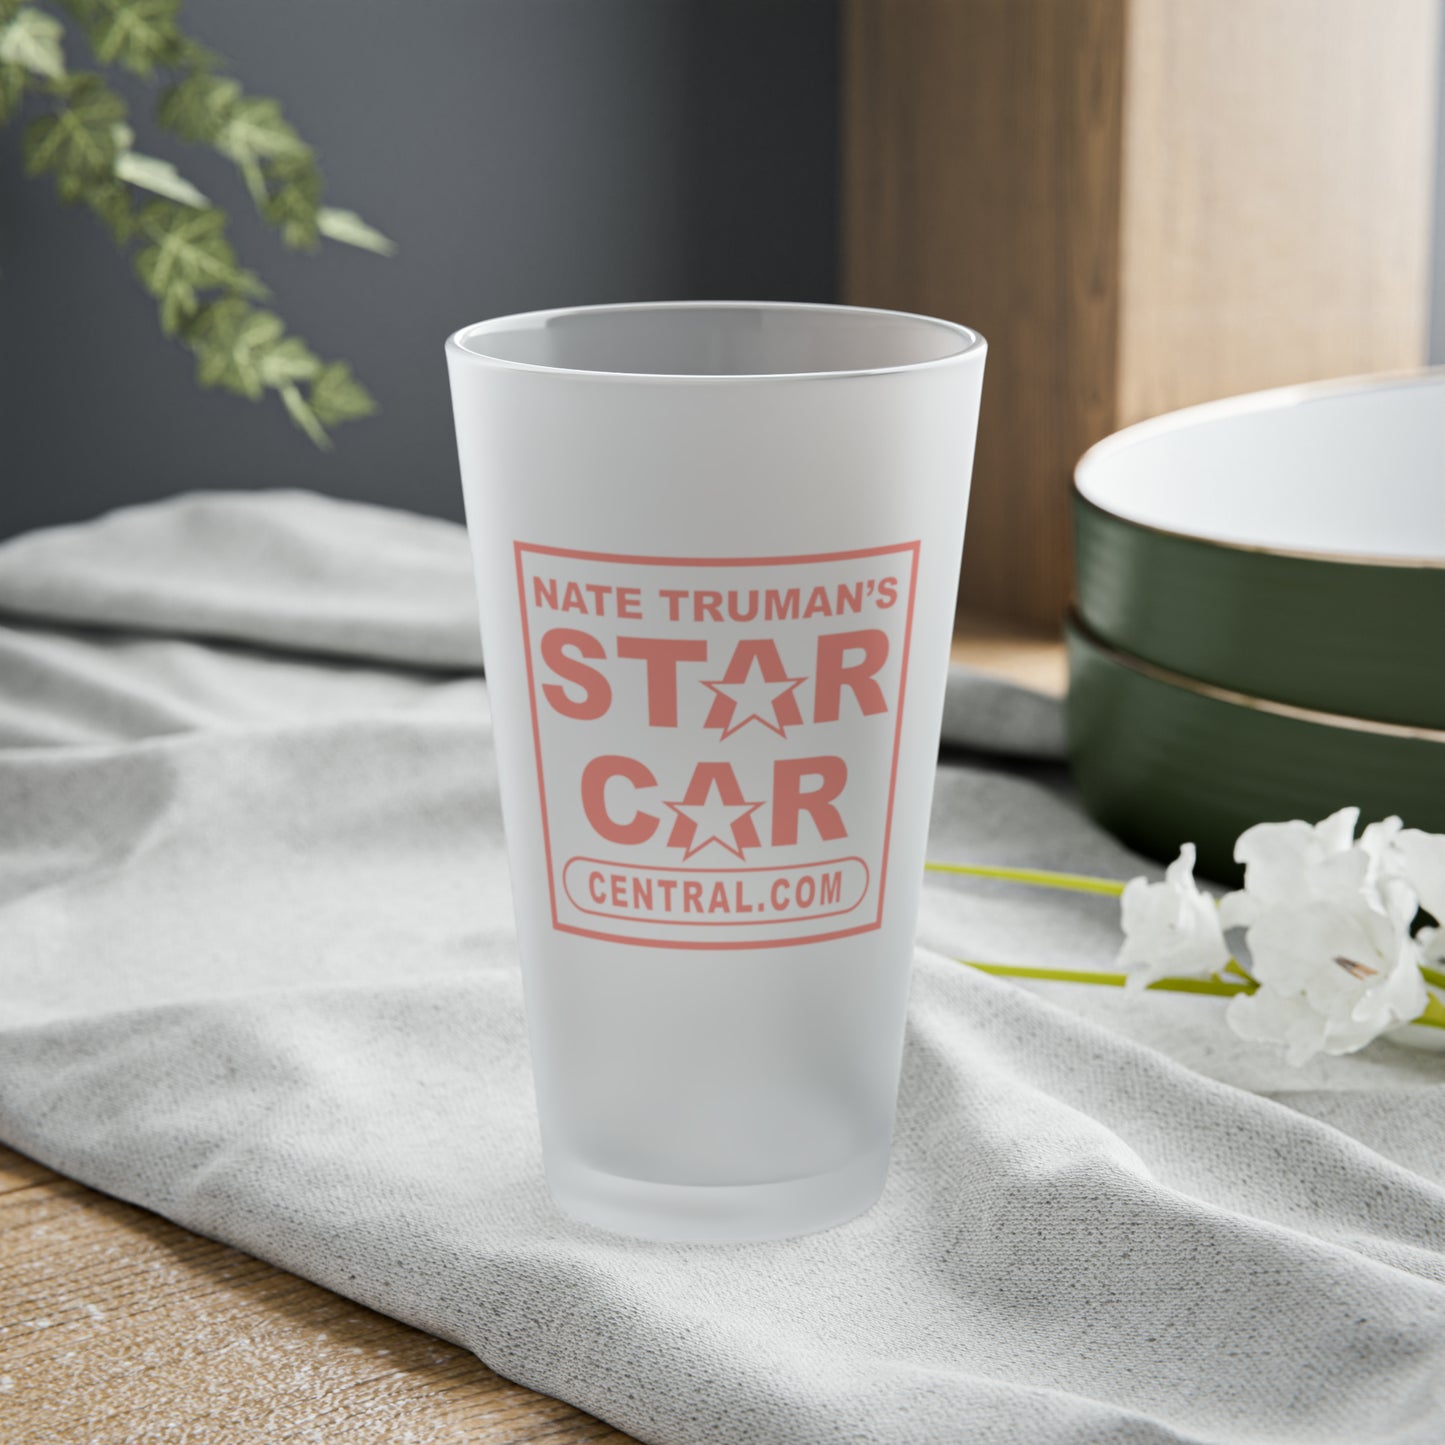 Nate Truman's STAR CAR CENTRAL Official Frosted Pint Glass, 16oz, Movie Car, Movie Cars (4 Colors!)